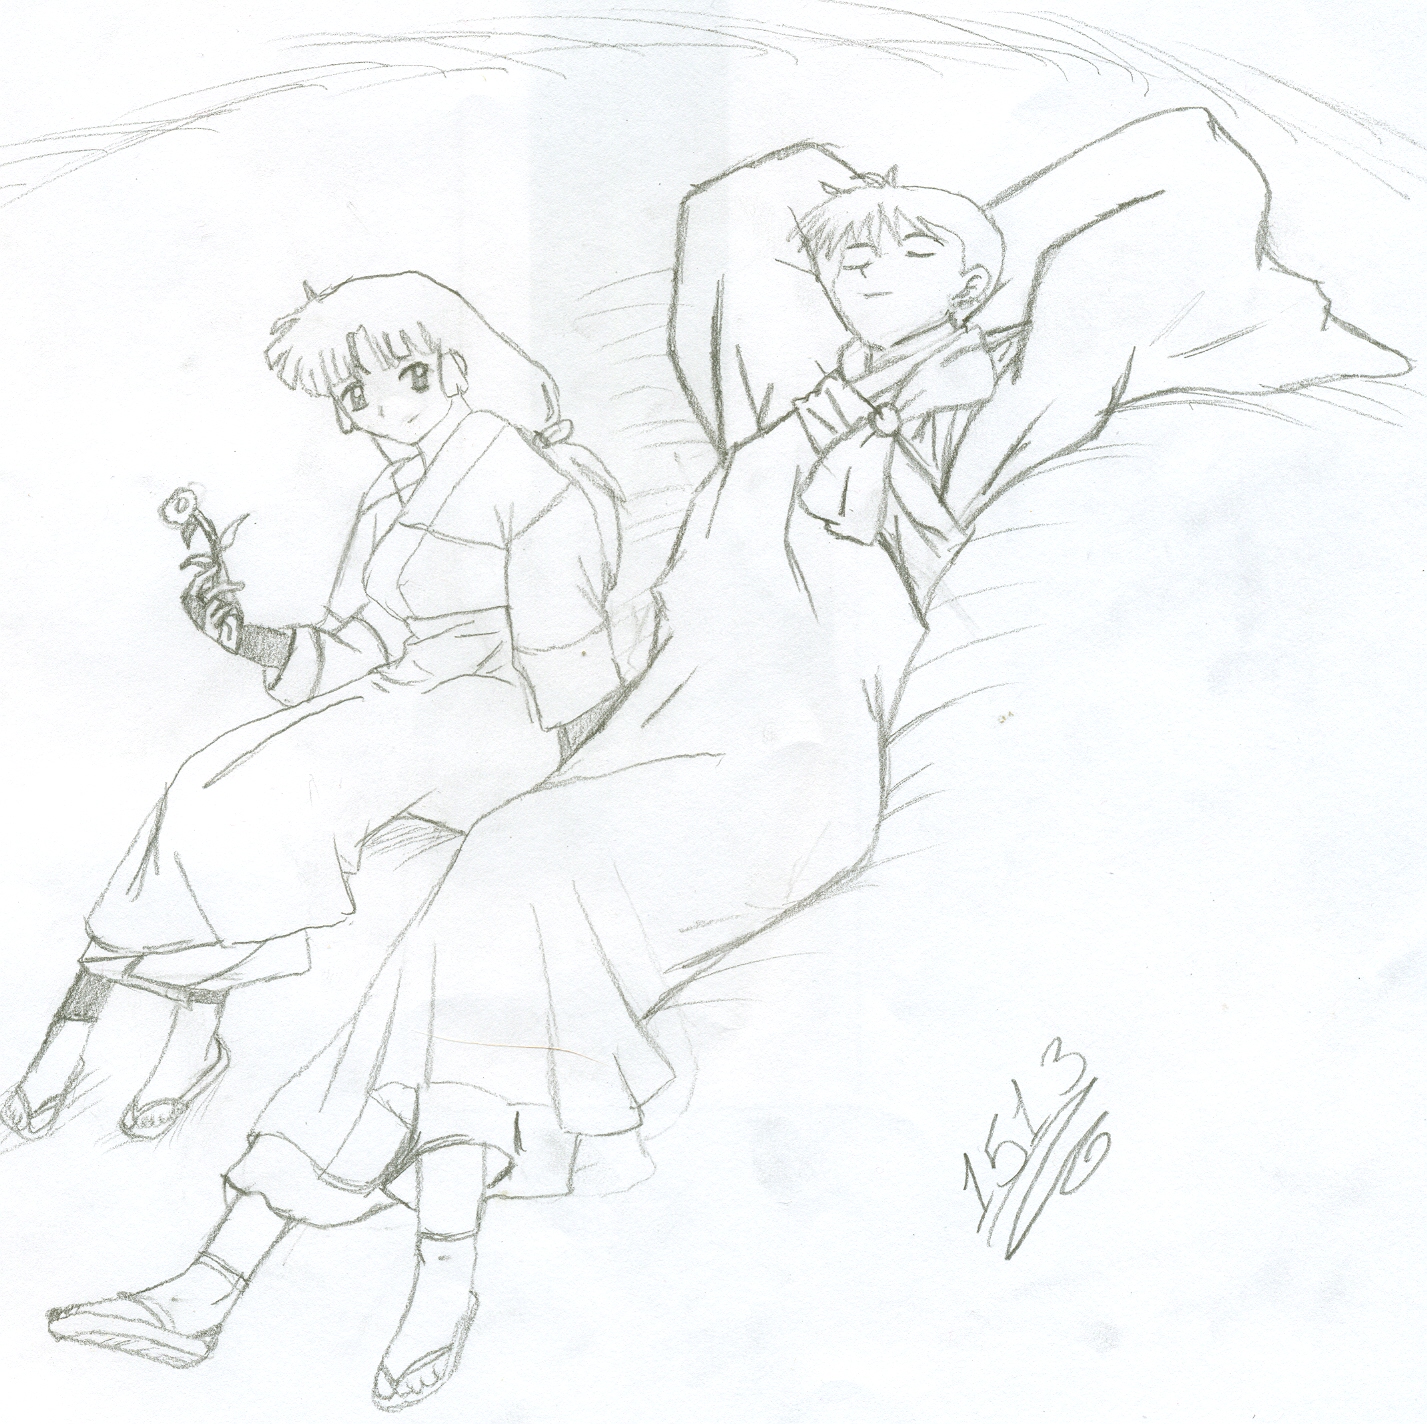 Takita_9 - Request - Sango and Miroku by 1513